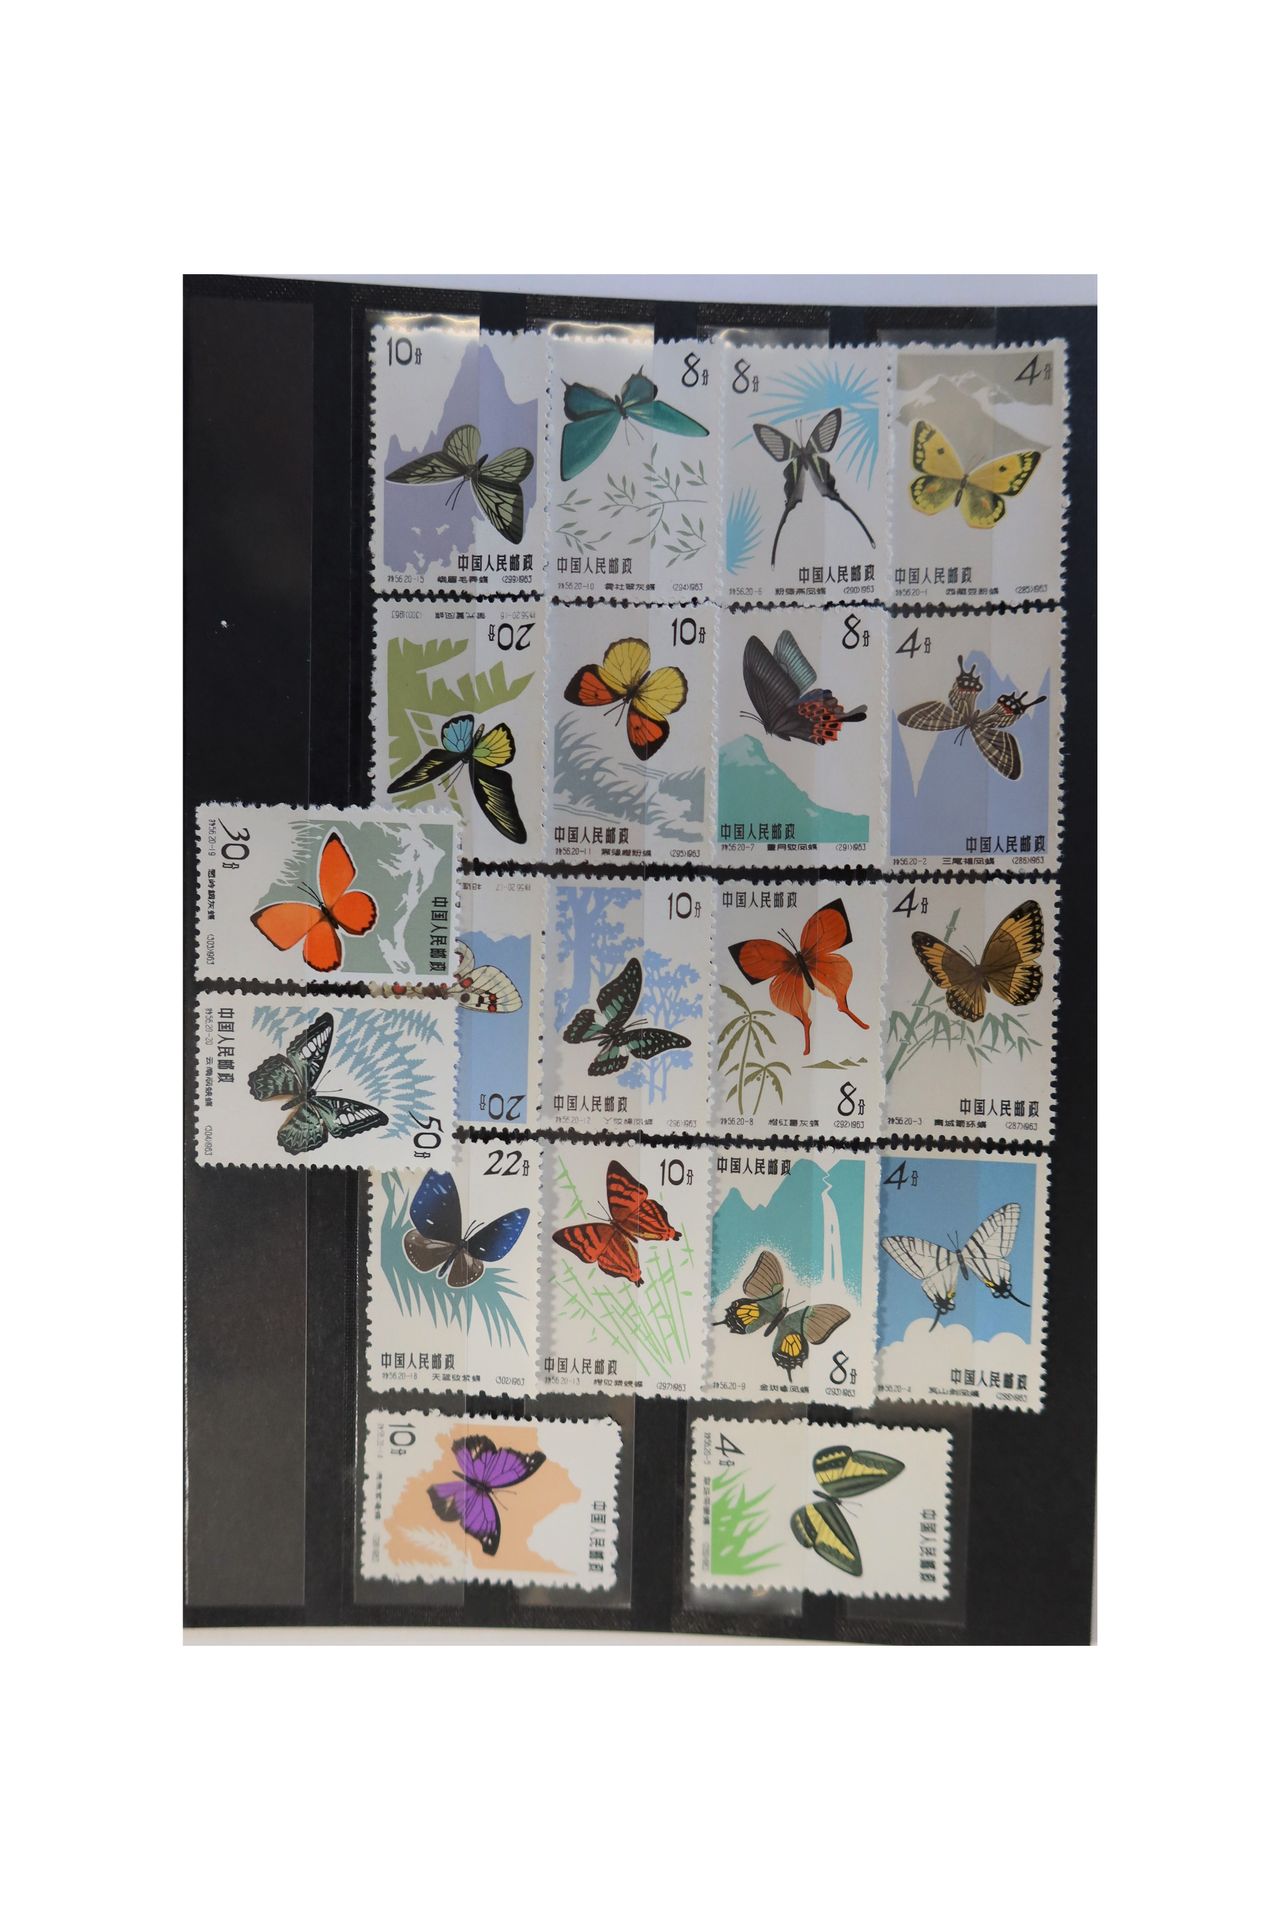 Null [CHINA]
Superb series of "Papillons" n° 1446 to 1465, new, 20 values.